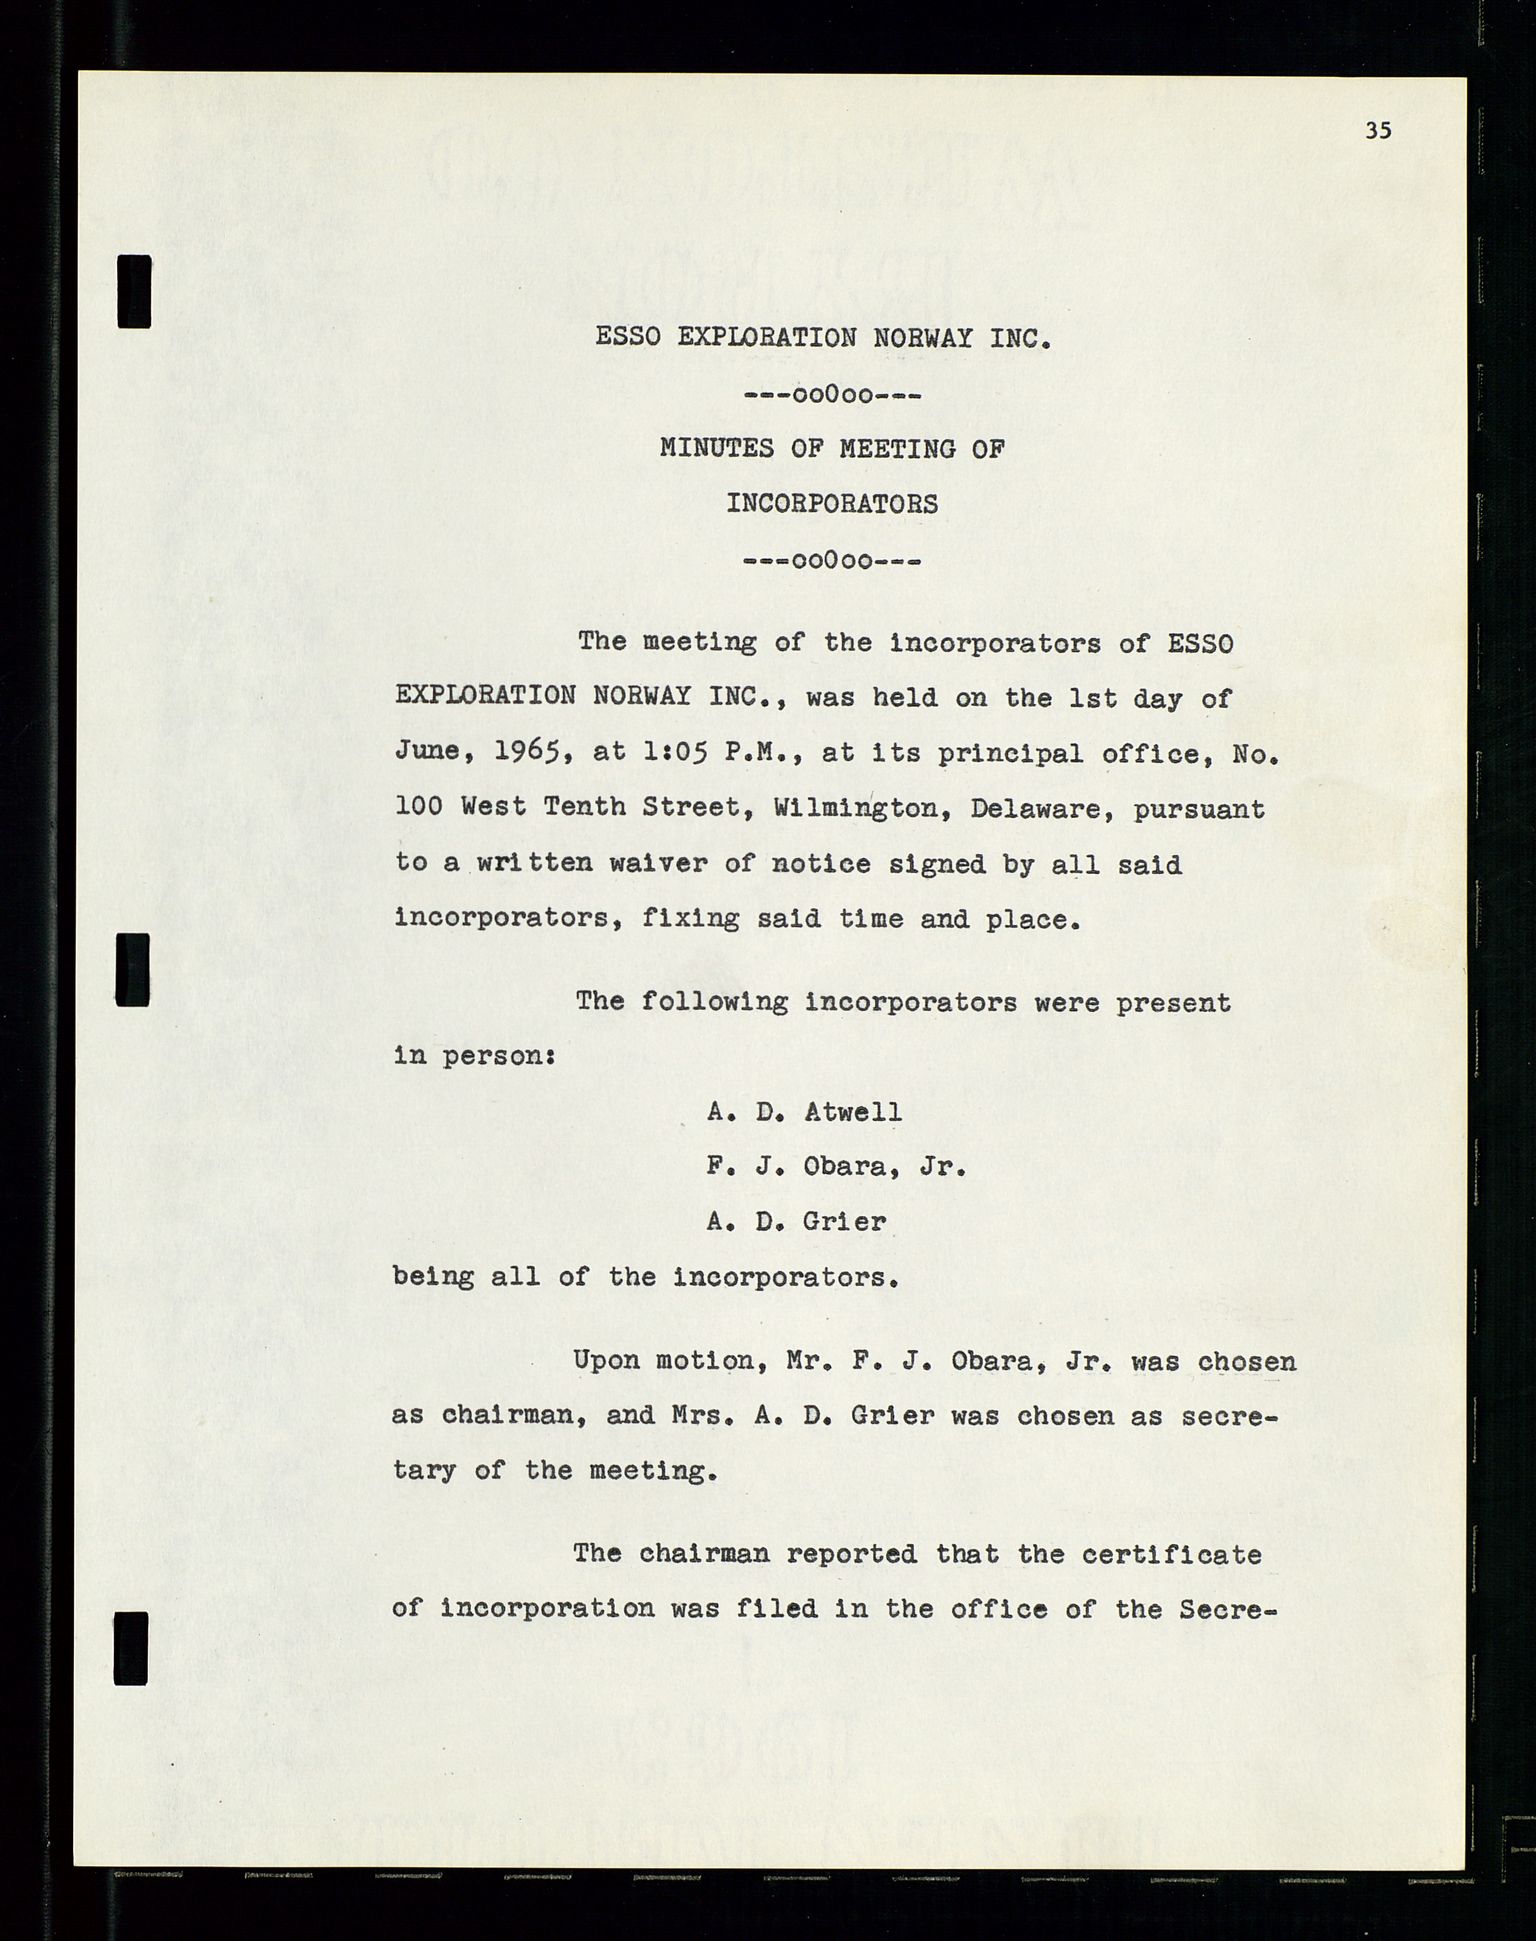 Pa 1512 - Esso Exploration and Production Norway Inc., SAST/A-101917/A/Aa/L0001/0001: Styredokumenter / Corporate records, By-Laws, Board meeting minutes, Incorporations, 1965-1975, s. 35